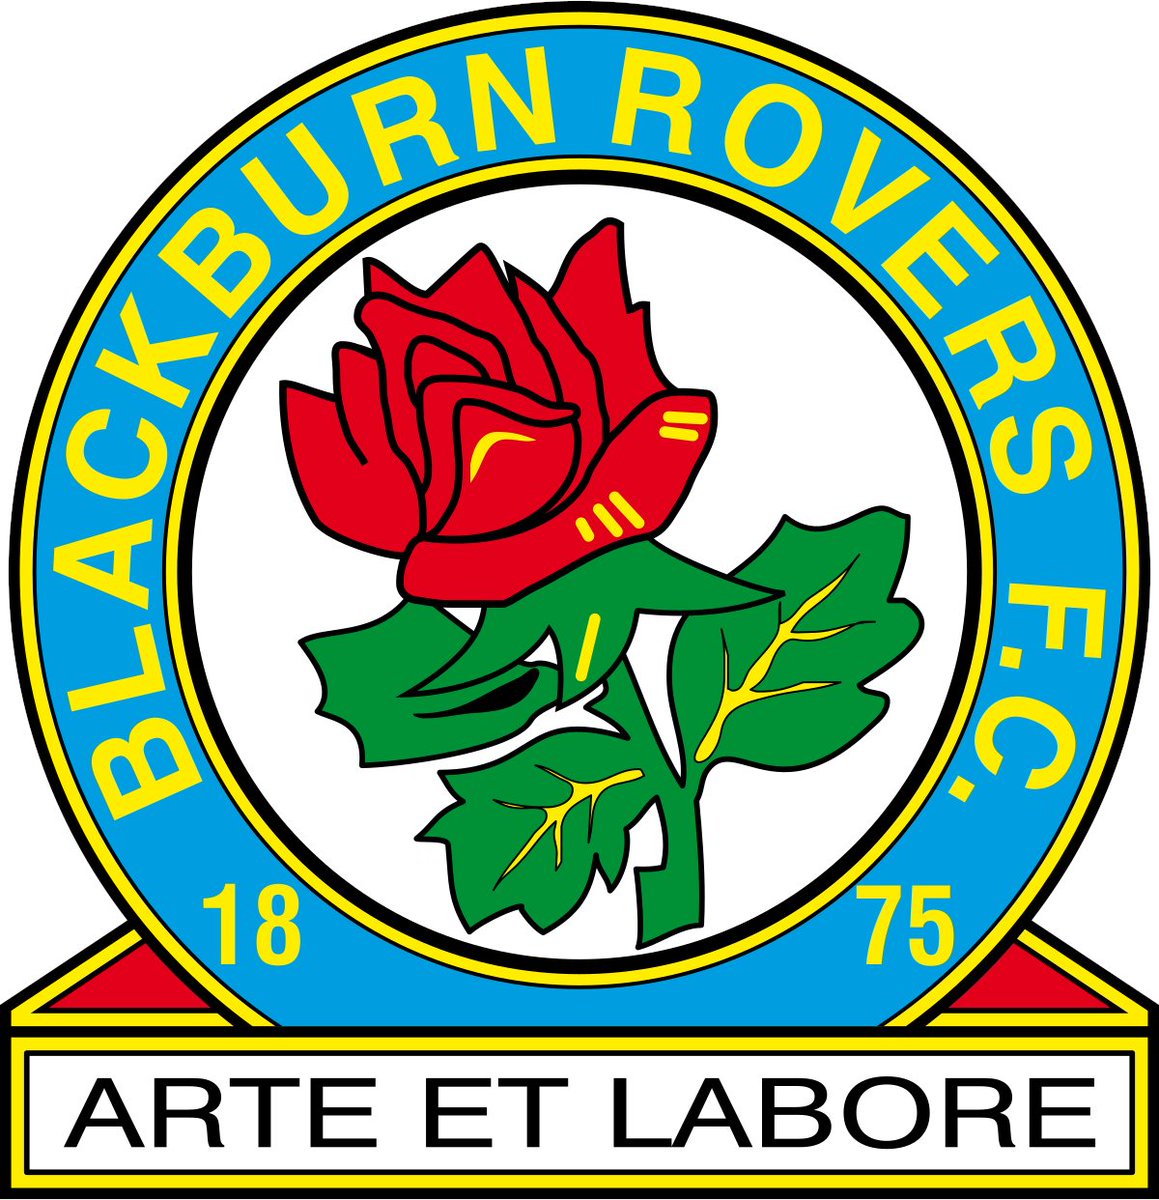 Let's start with England:1. Blackburn RoversTheir motto "Arte et Labore" ("by skill and labour") says it all.2. EvertonWho doesn't like Prince Rupert's Tower?3. Brighton & Hove AlbionSerenity.4. QPR @DanKNorris sublime monogram.2/26 #Rovers  #EFC  #BHAFC  #QPR